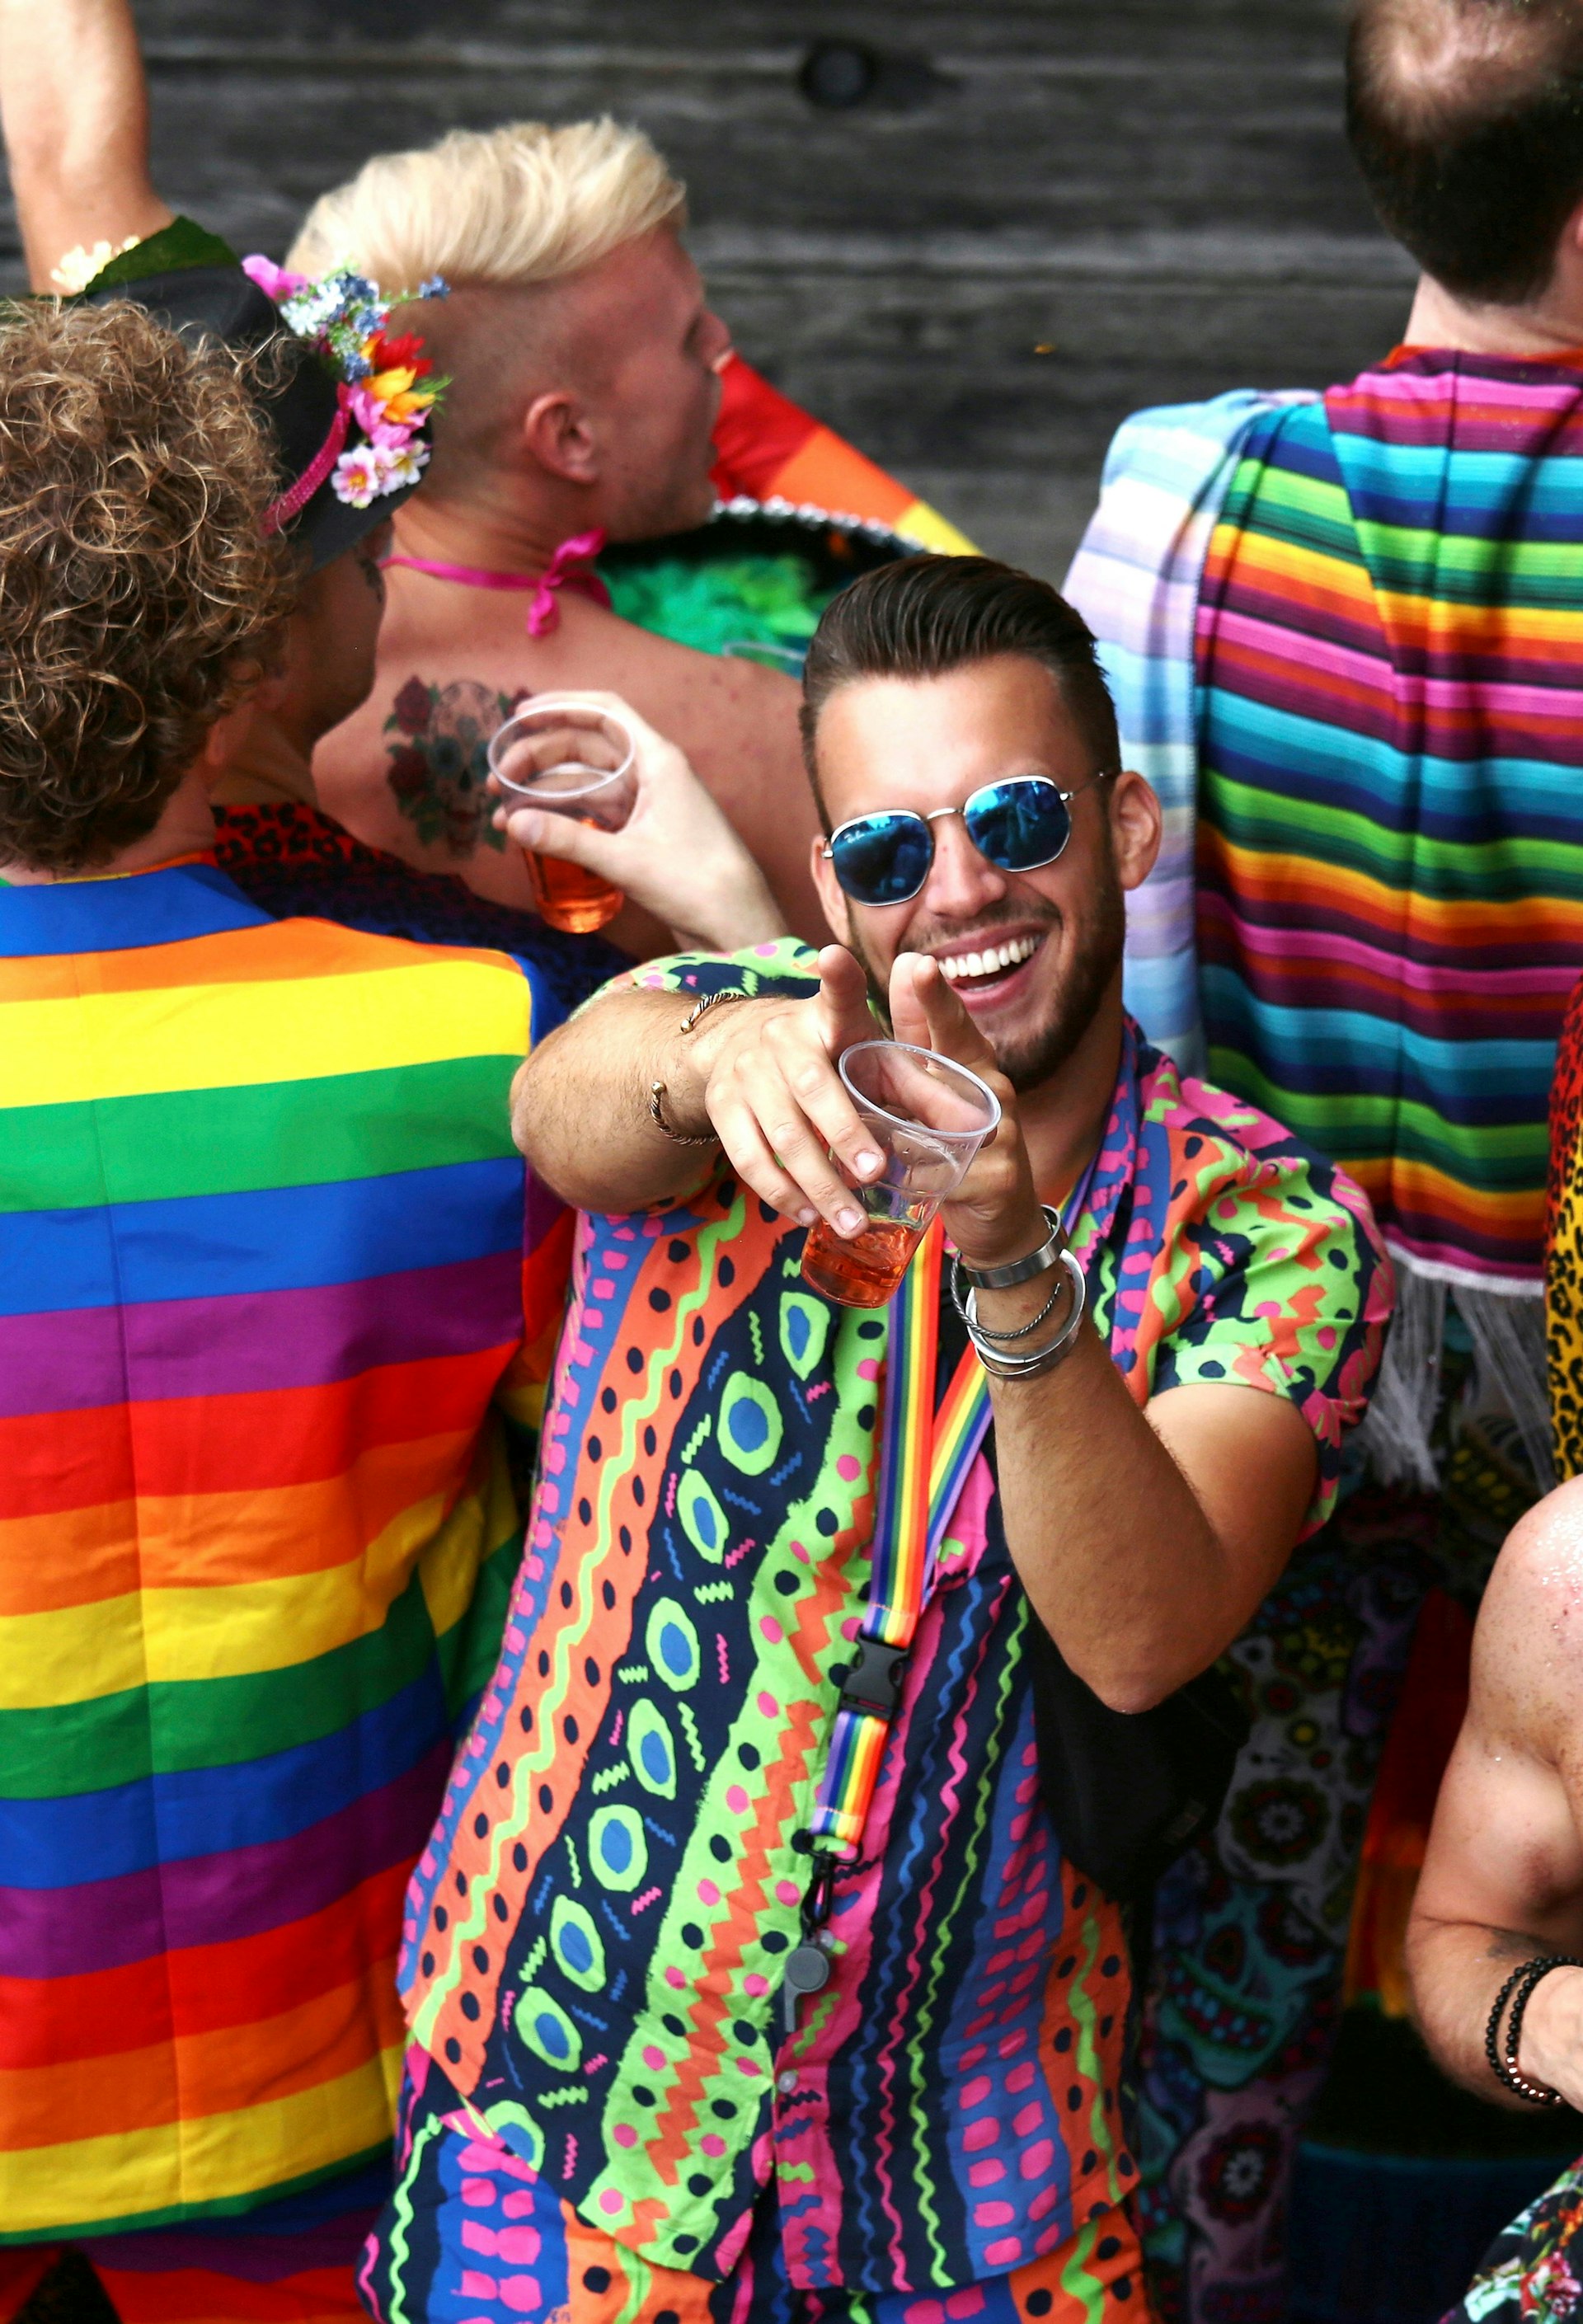 Revellers wearing rainbow colors celebrating Pride. One in glasses is smiling and posing for the camera